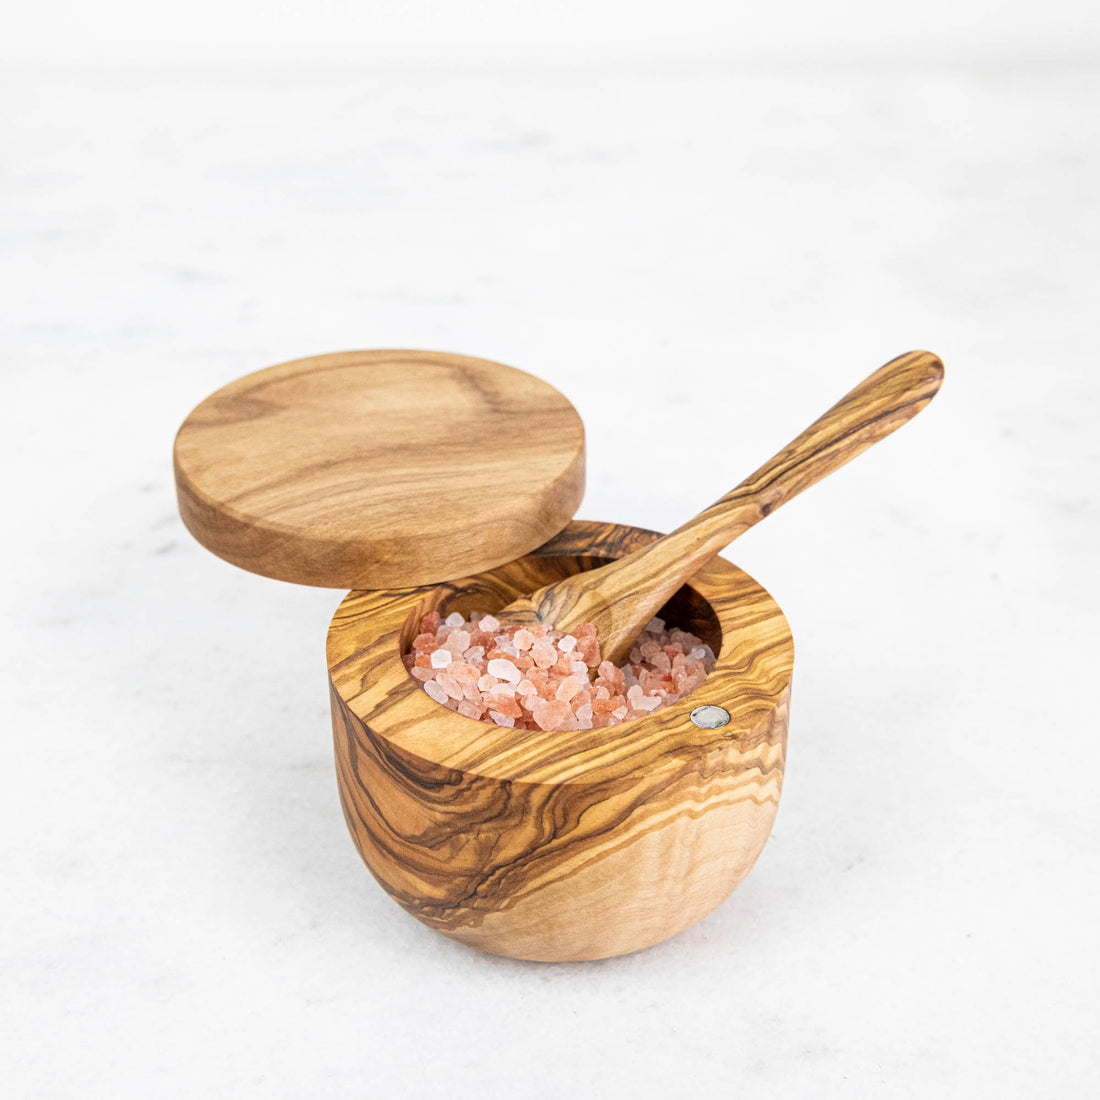 An Natural Olivewood olive wood salt cellar with a spoon, containing pink Himalayan salt. Hand wash only.